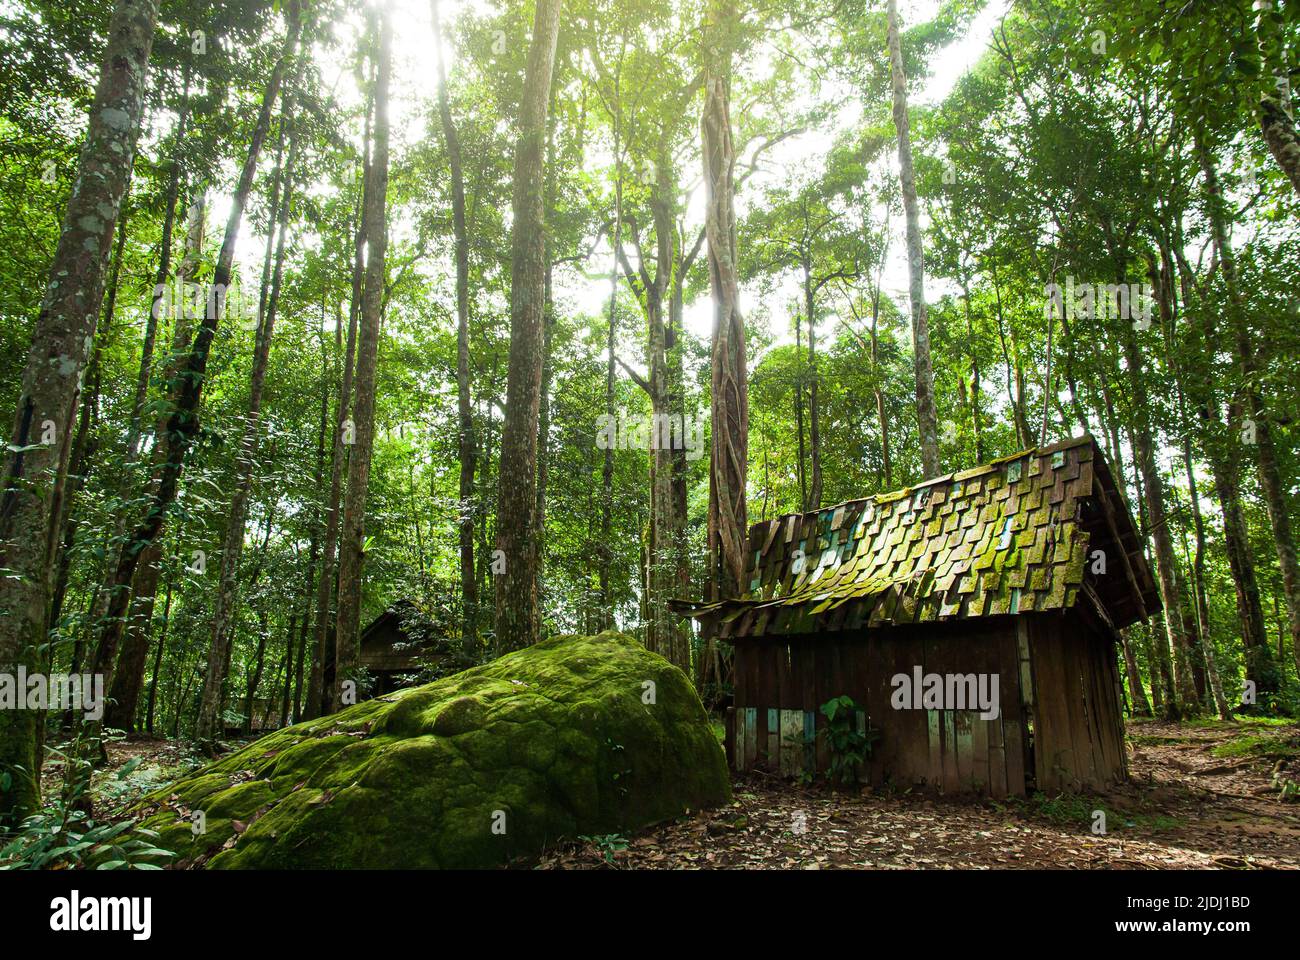 An old wooden hut in a tropical forest during a rainy season, green moss and lichen cover the wooden roof. Stock Photo